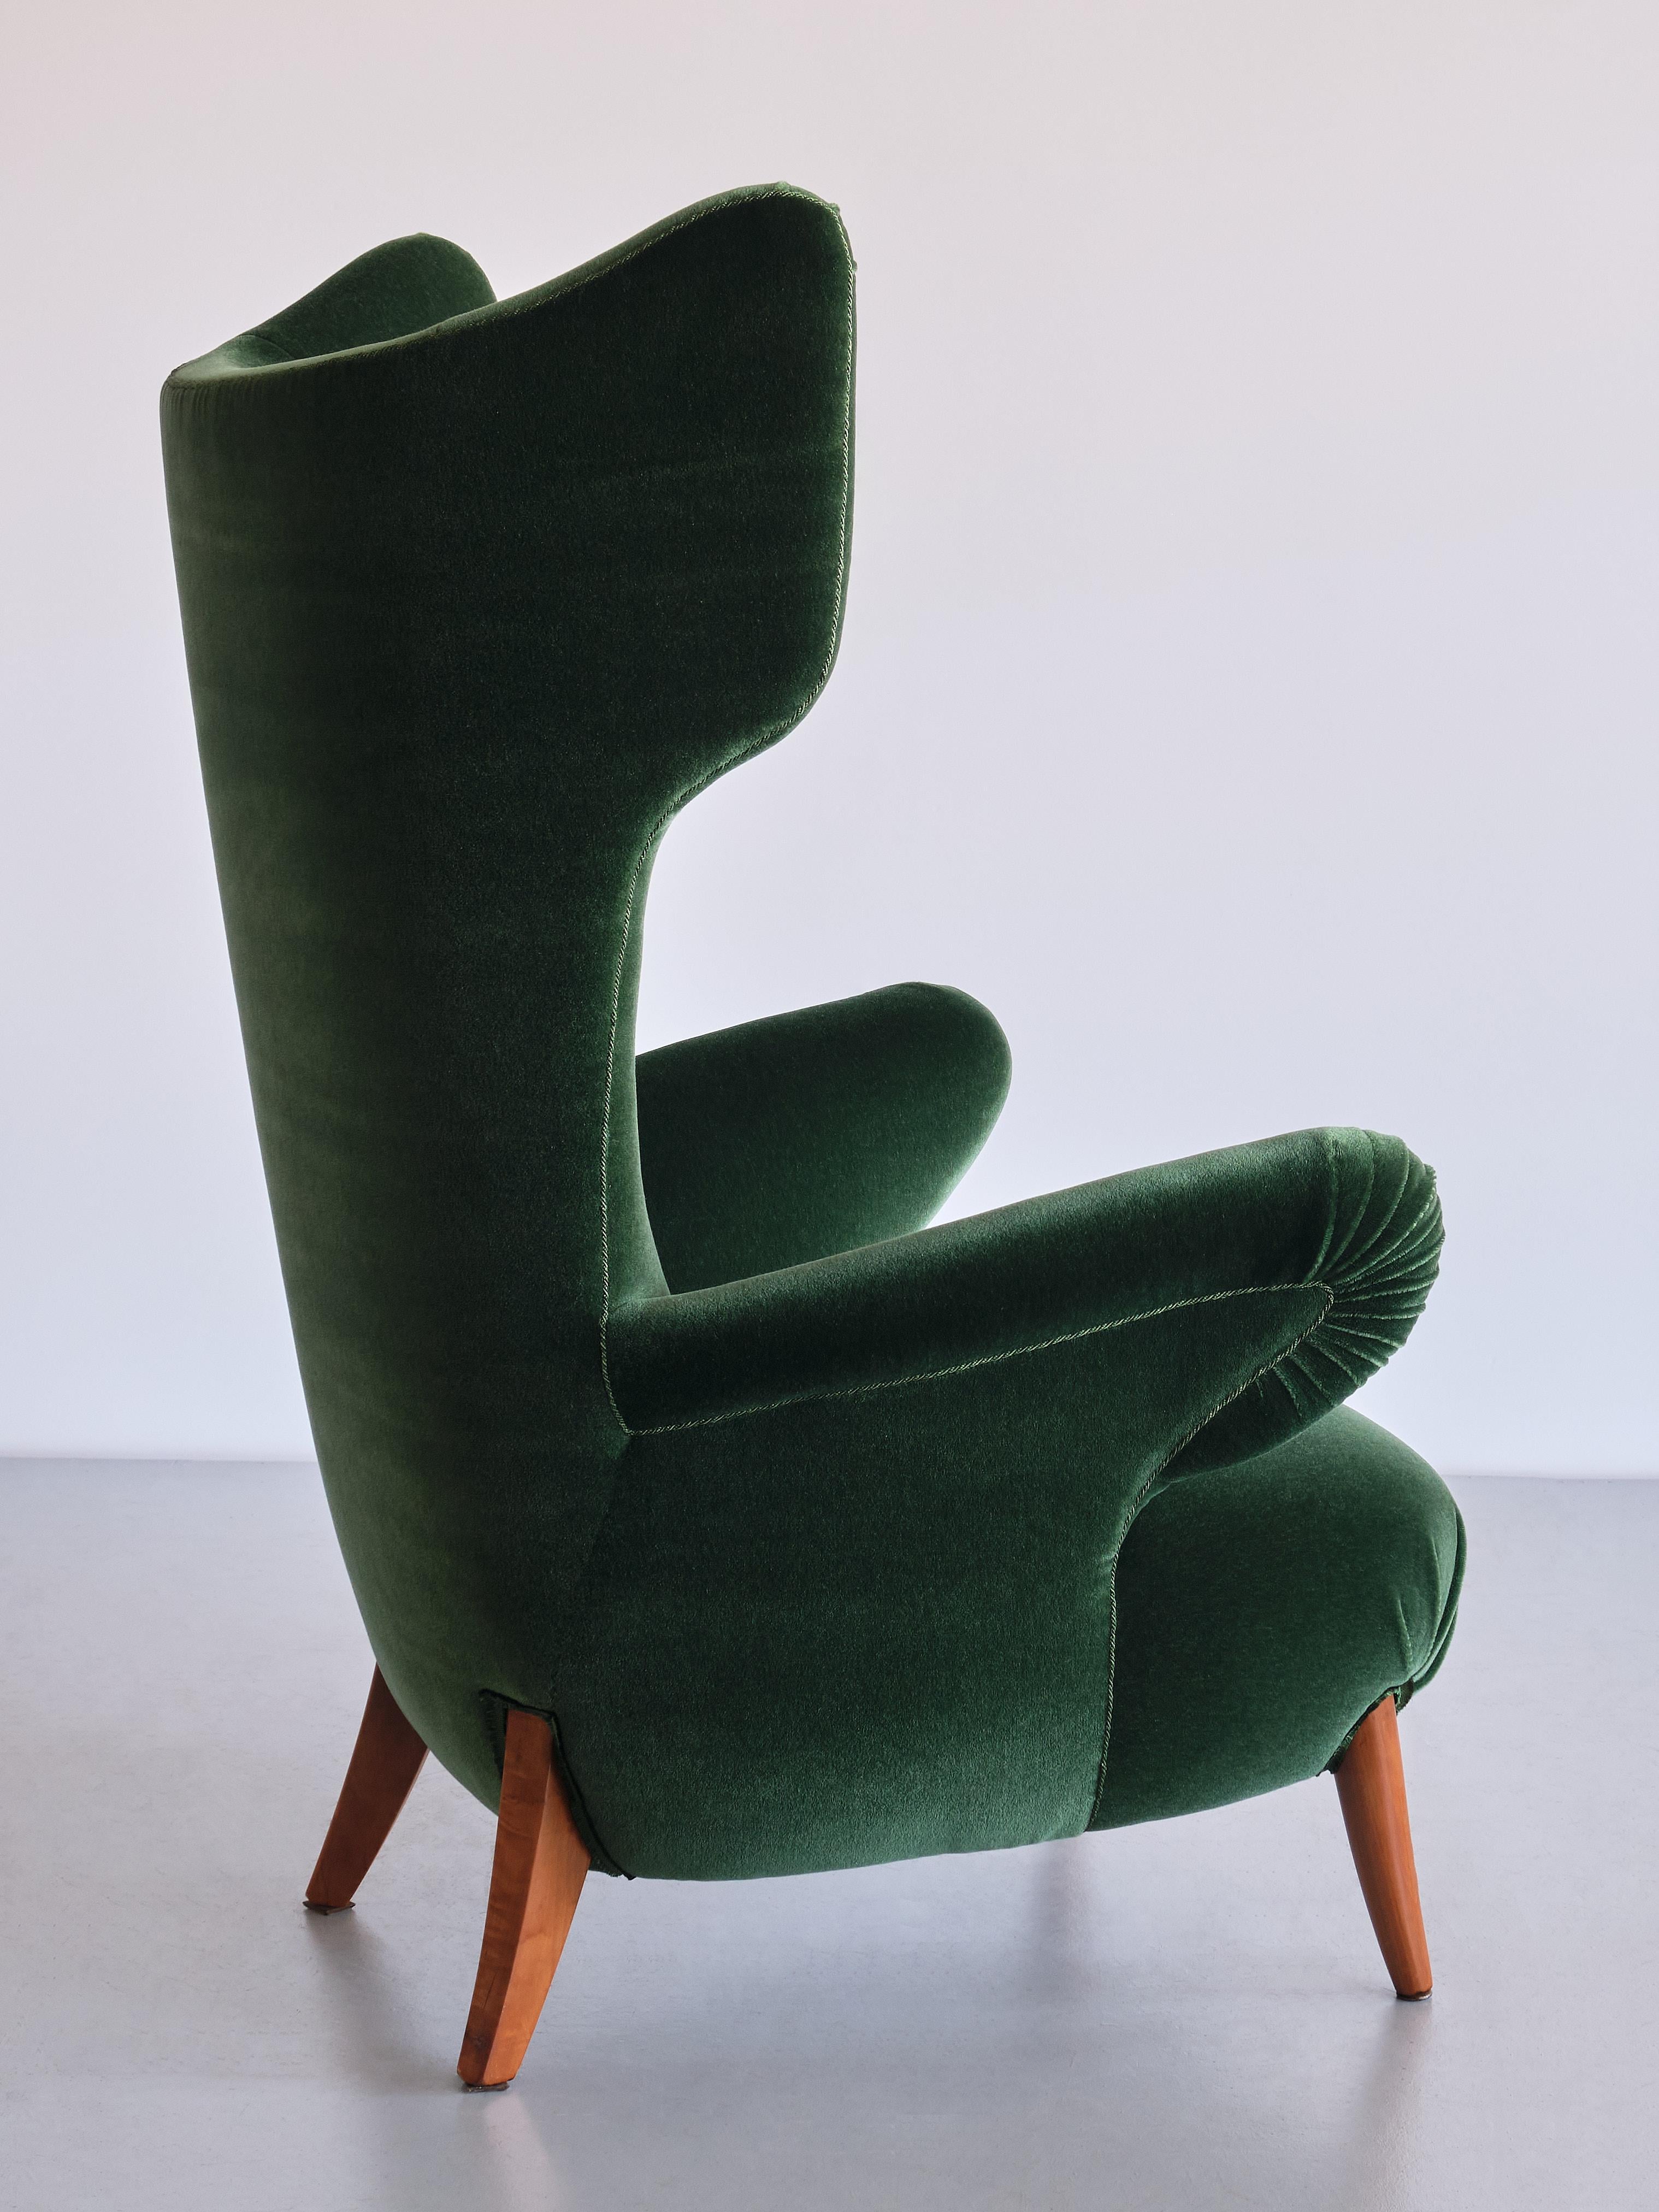 Mid-20th Century Important Ottorino Aloisio Wingback Chair in Green Mohair, Colli, Italy, 1957 For Sale